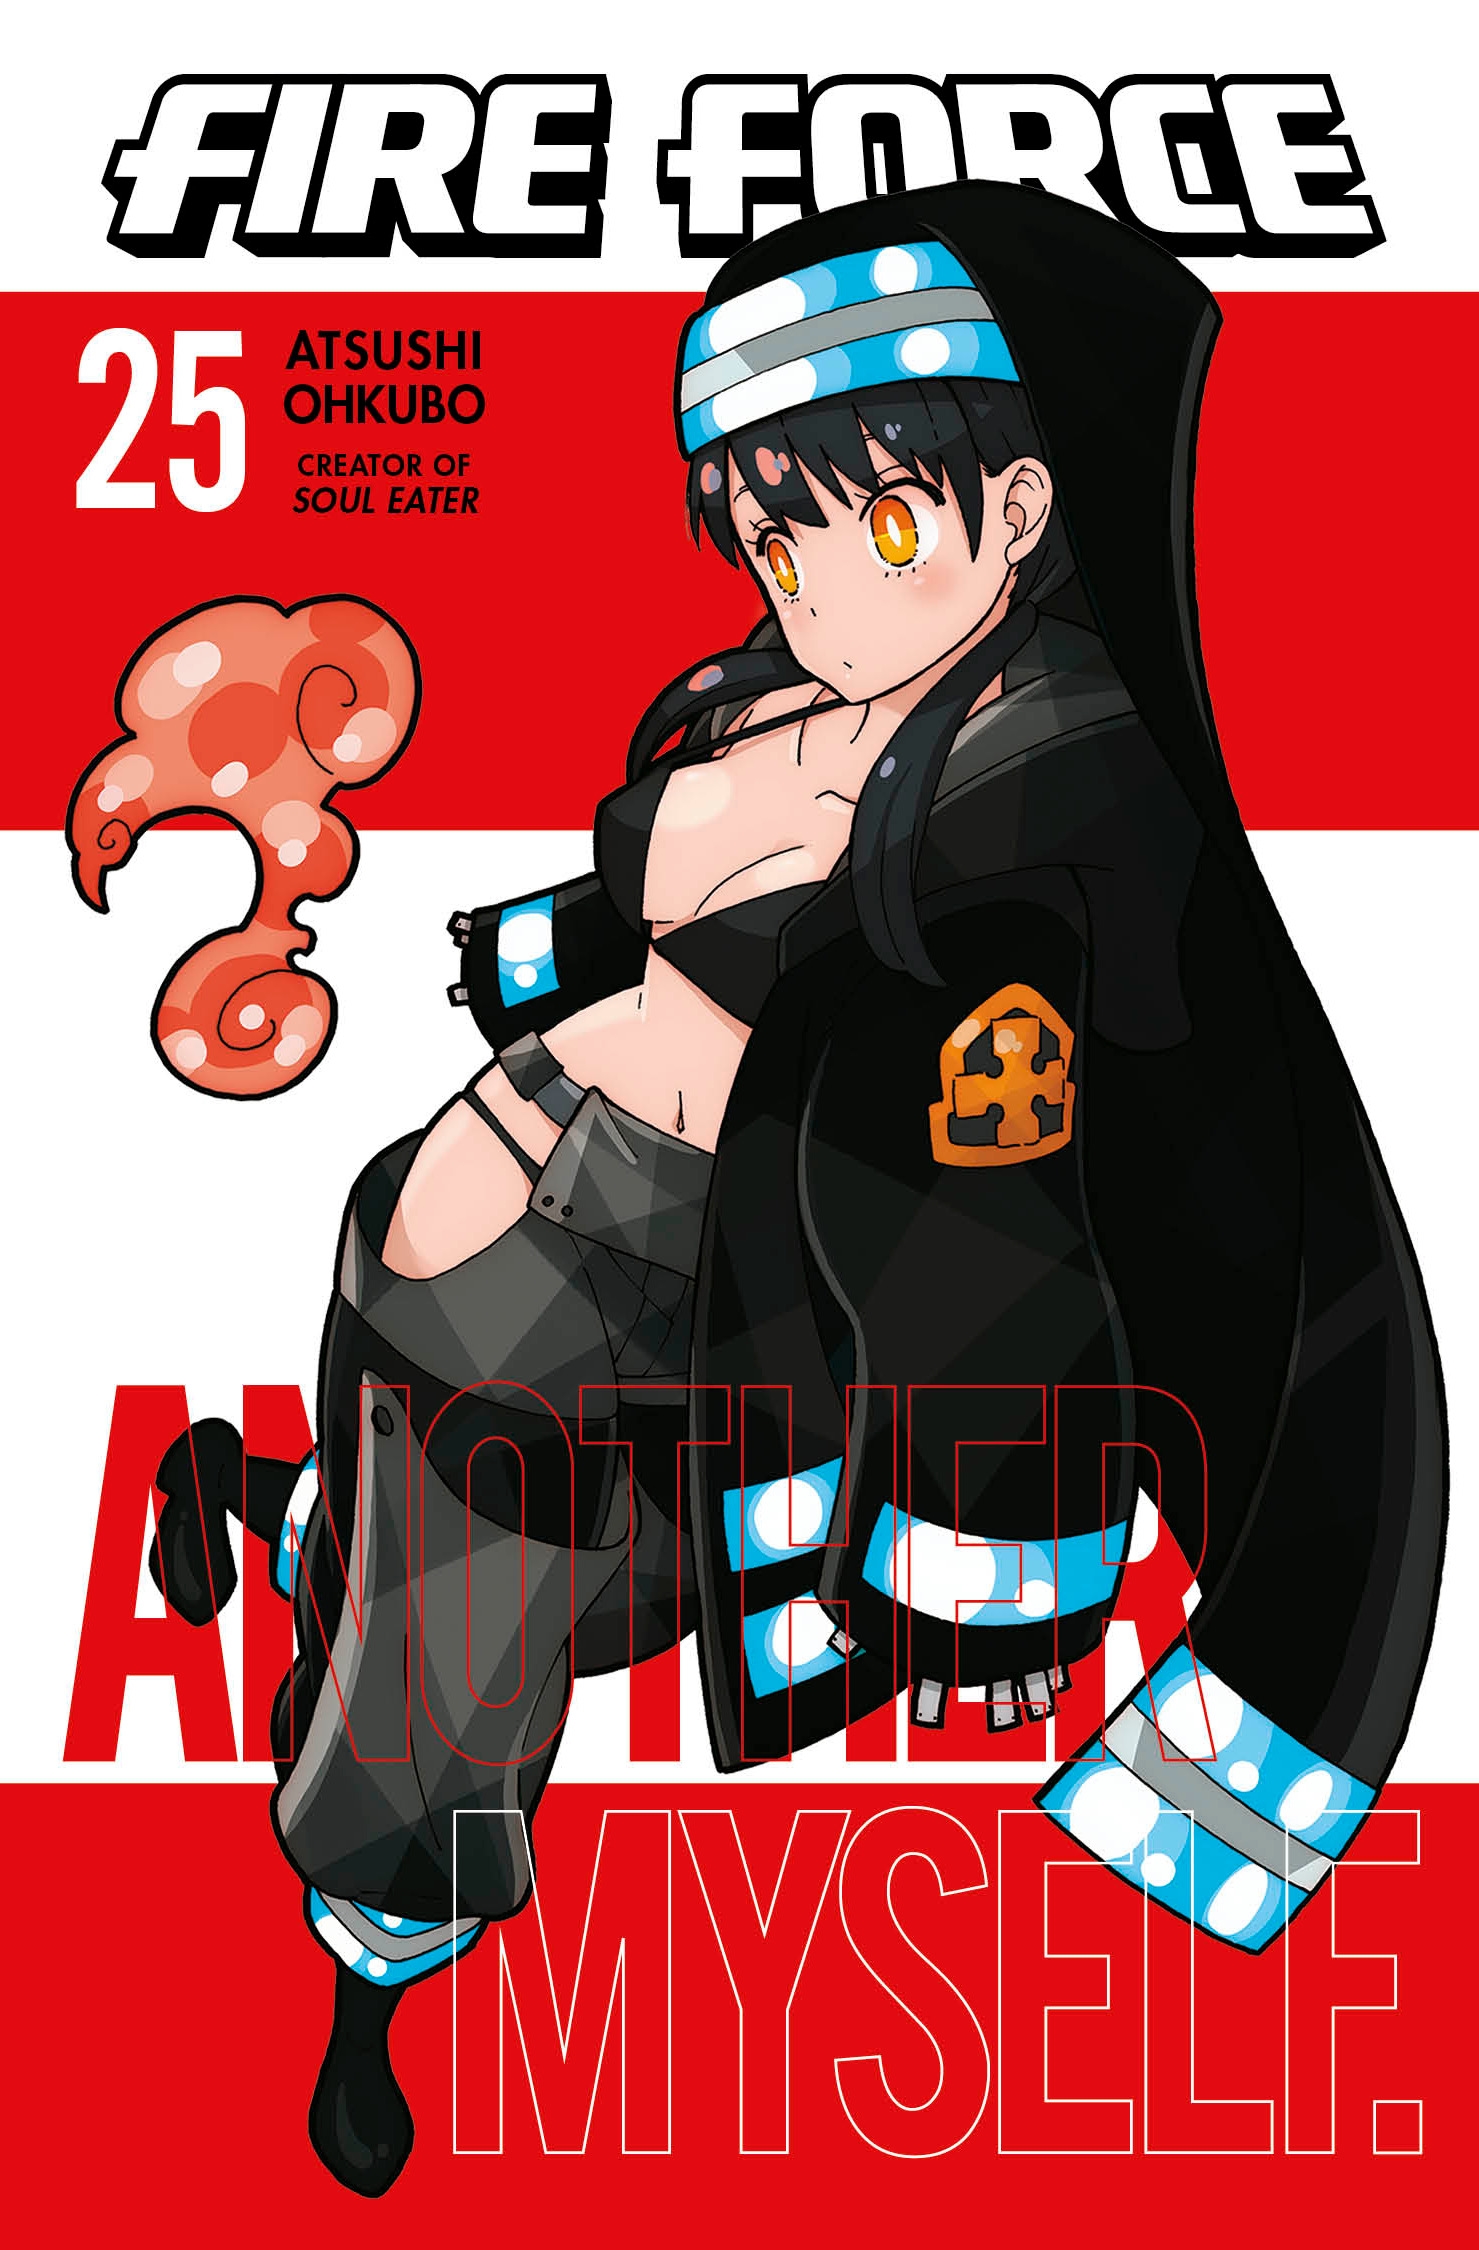 New Fire Force x Soul Eater official illustrations from the mobile